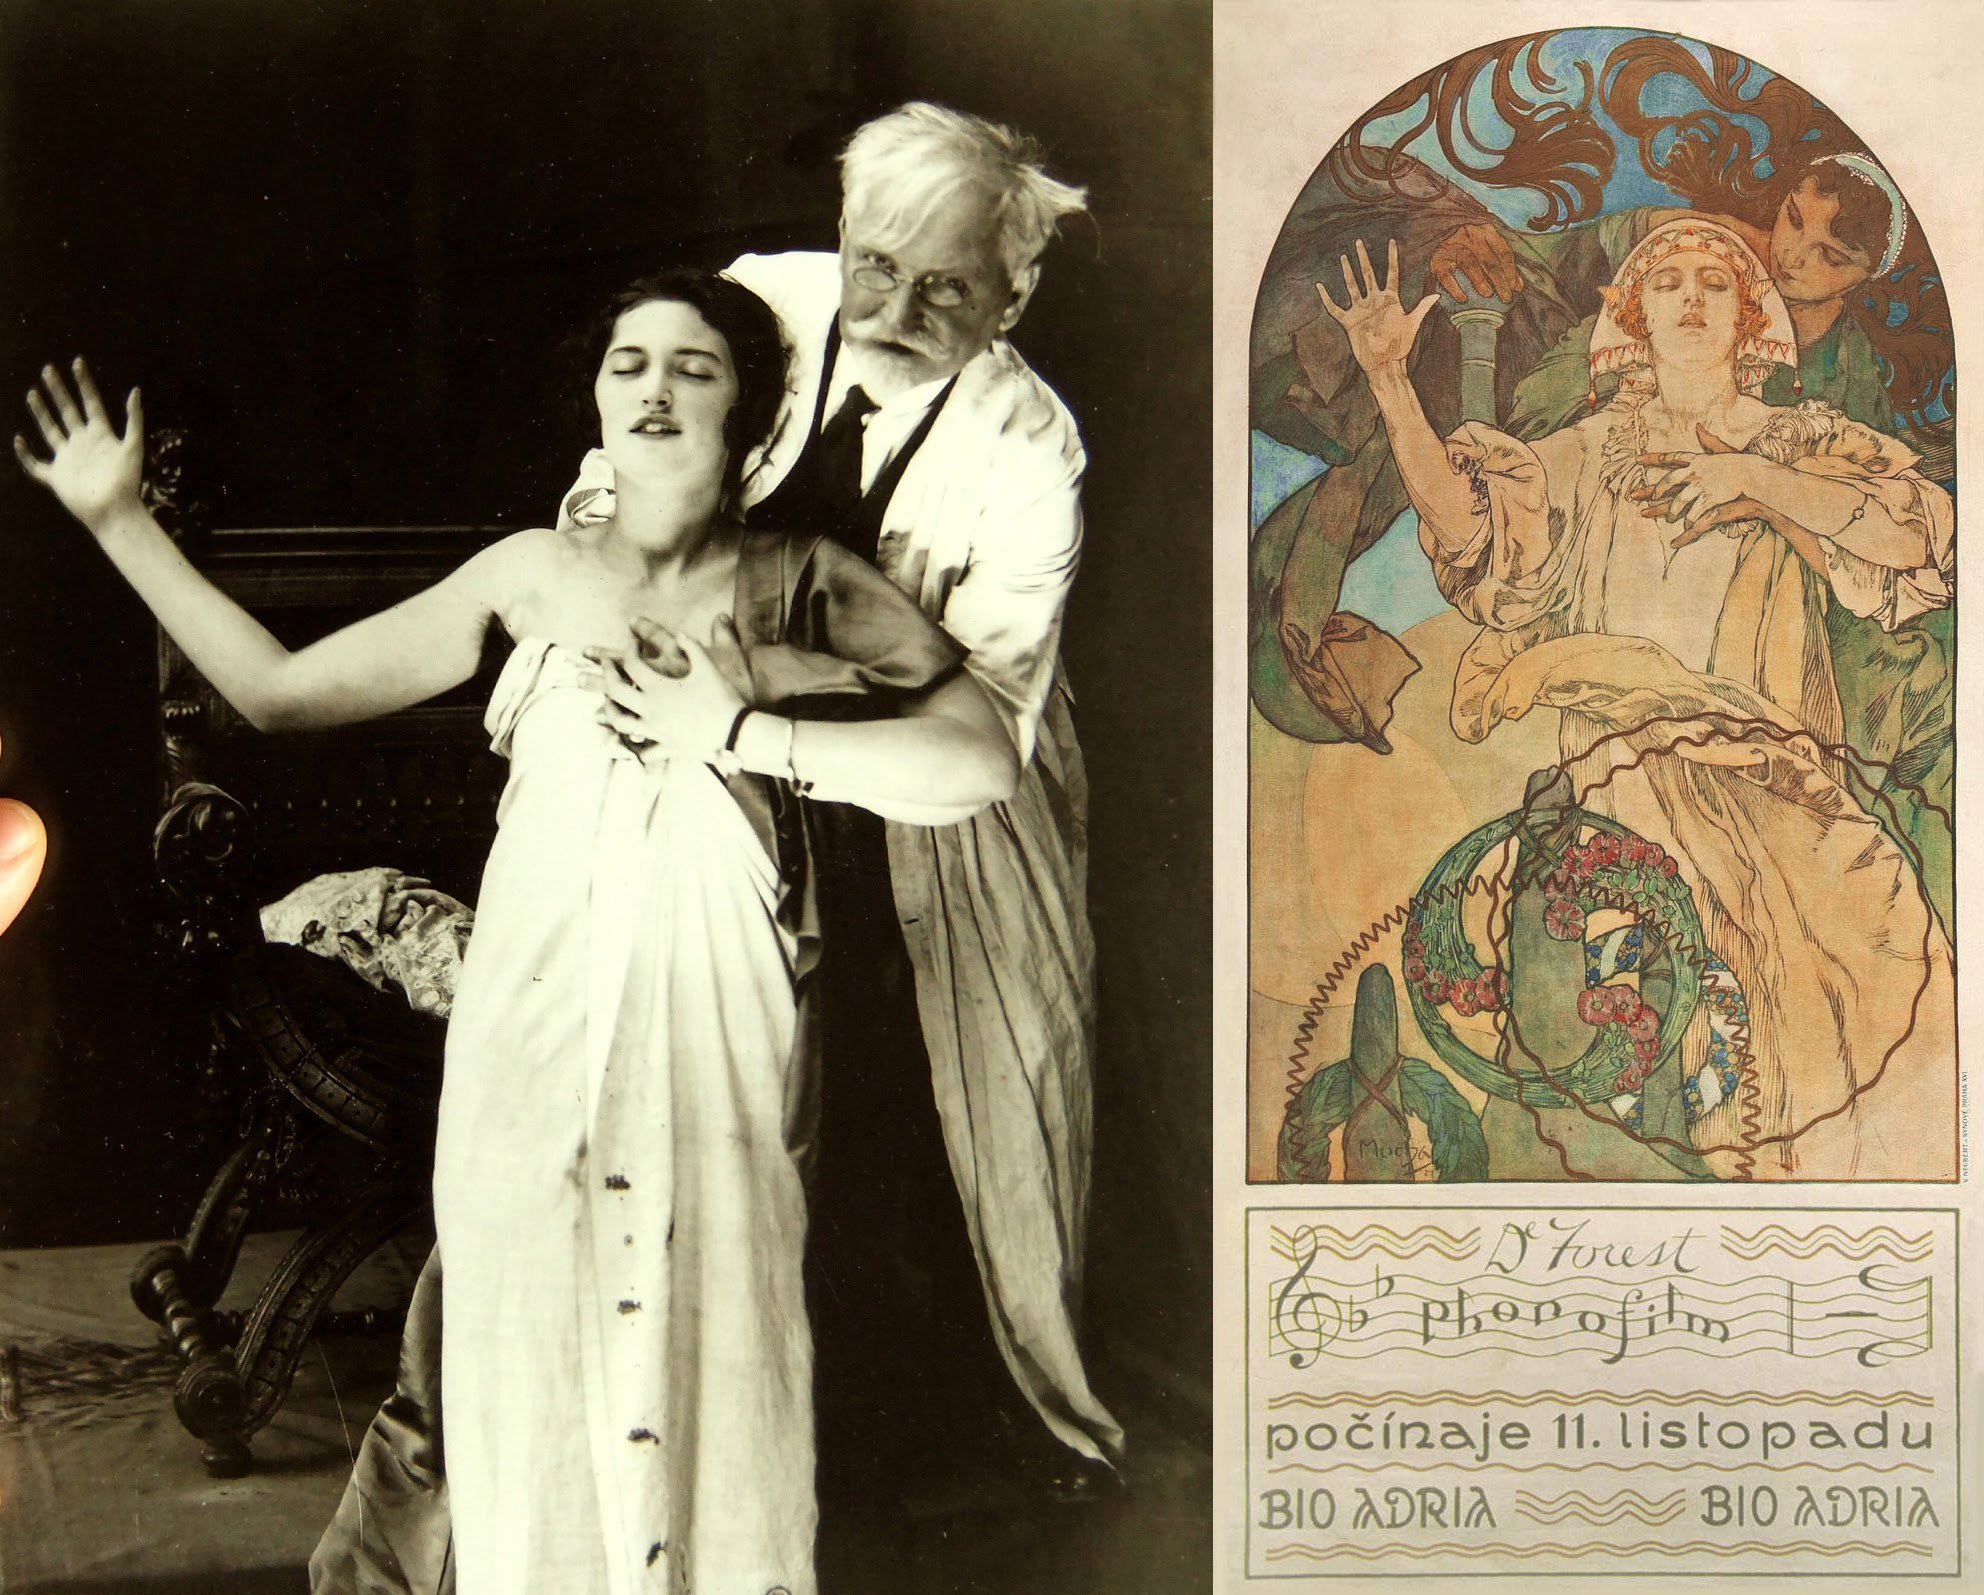 DeForest Phonofilm by Alphonse Mucha - 1927 private collection